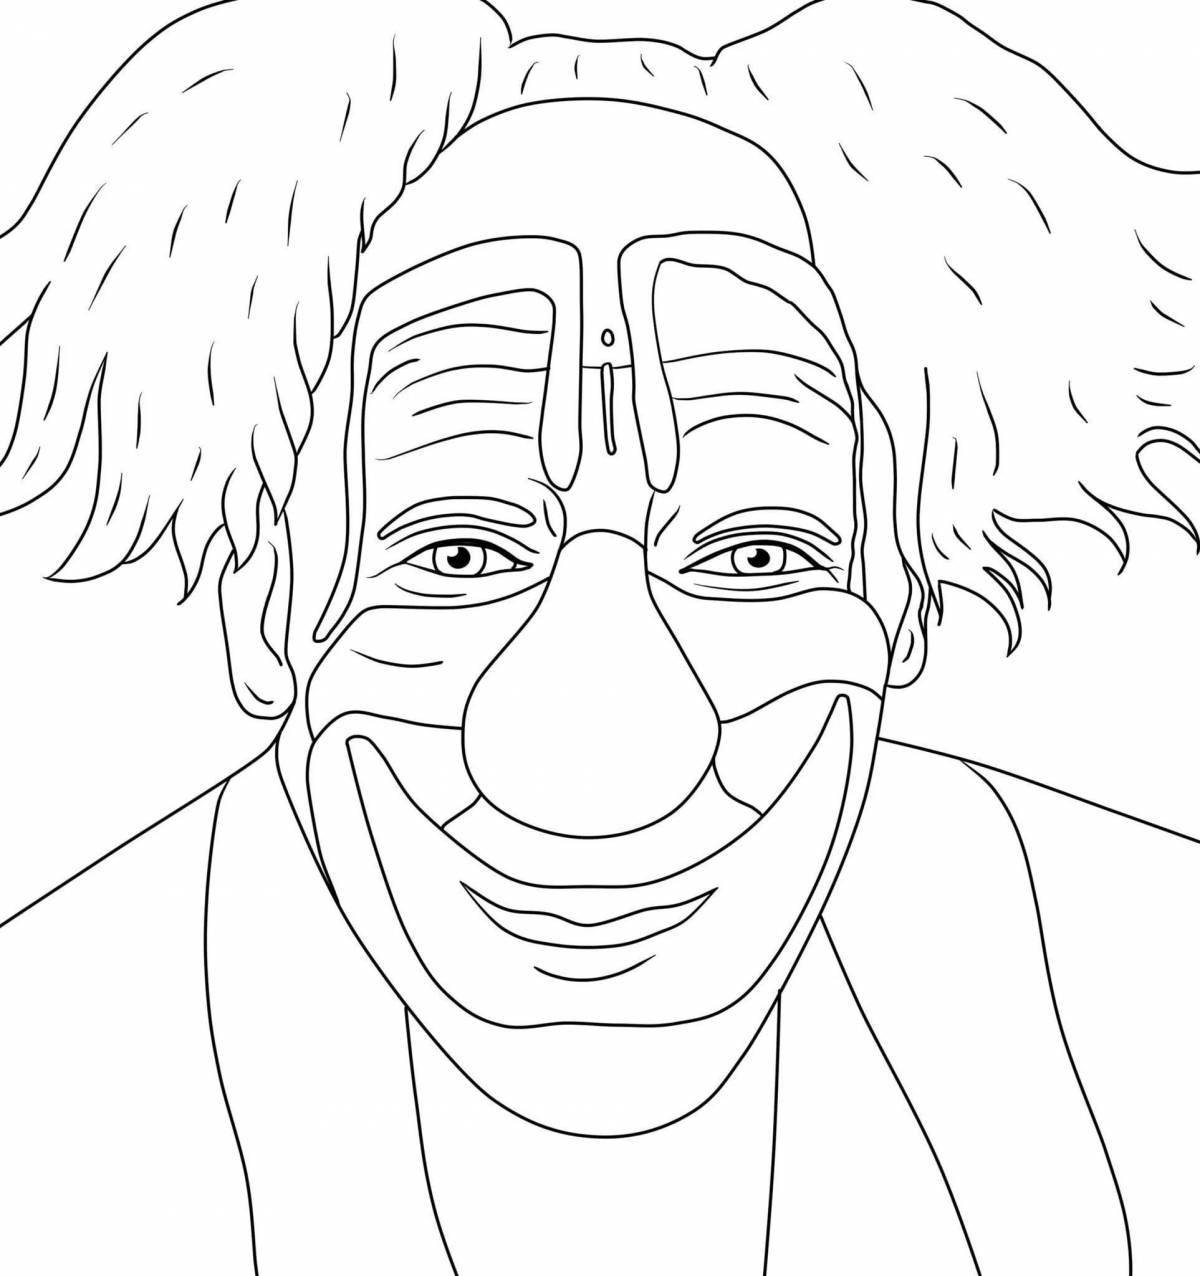 Ominous scary face coloring page